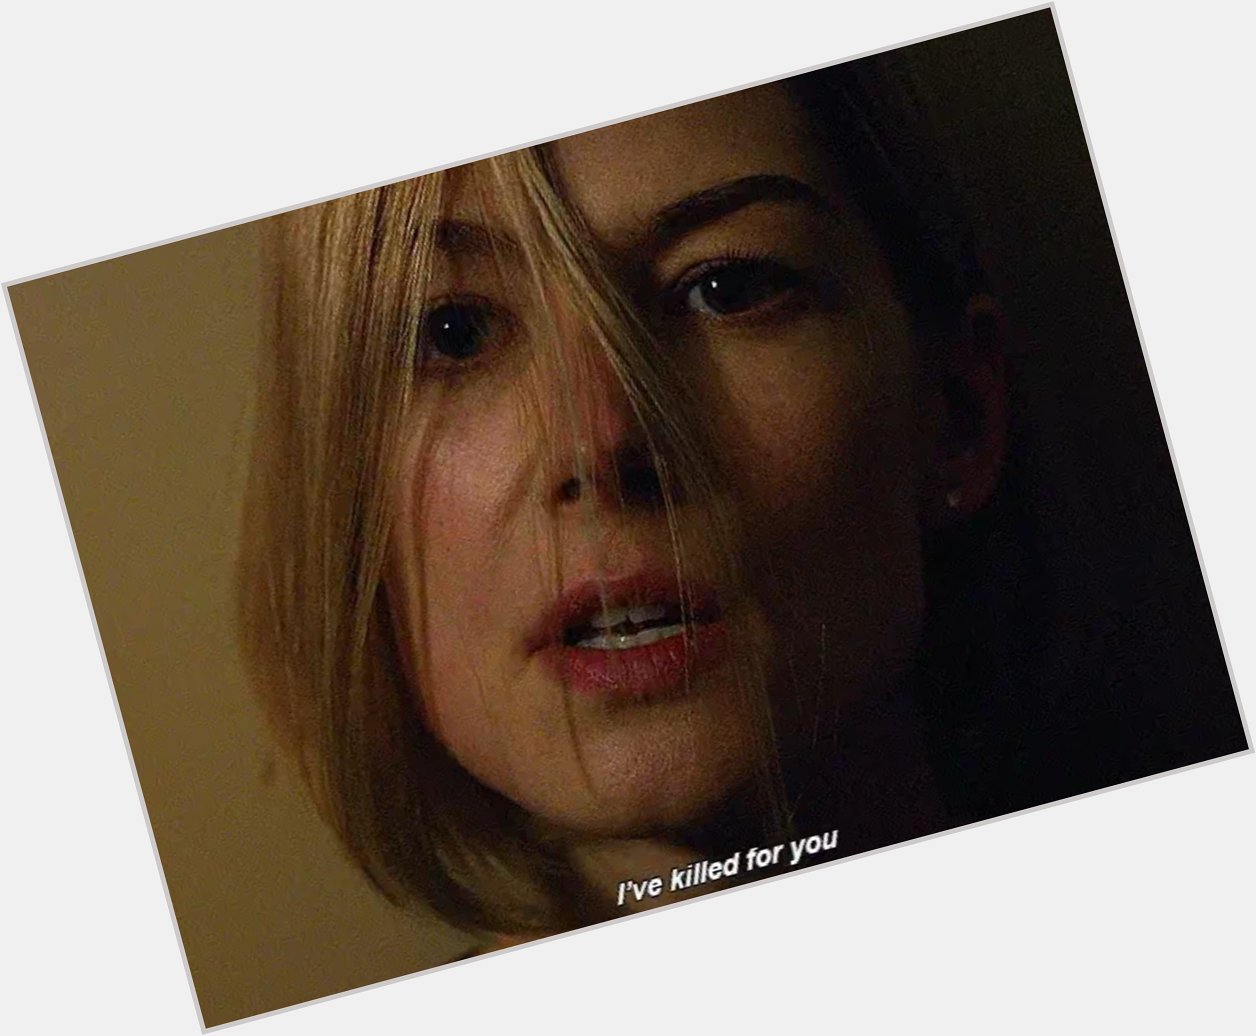 Gone girl (2014)
happy birthday to the icon herself, rosamund pike. one of the best performances of the last decade. 